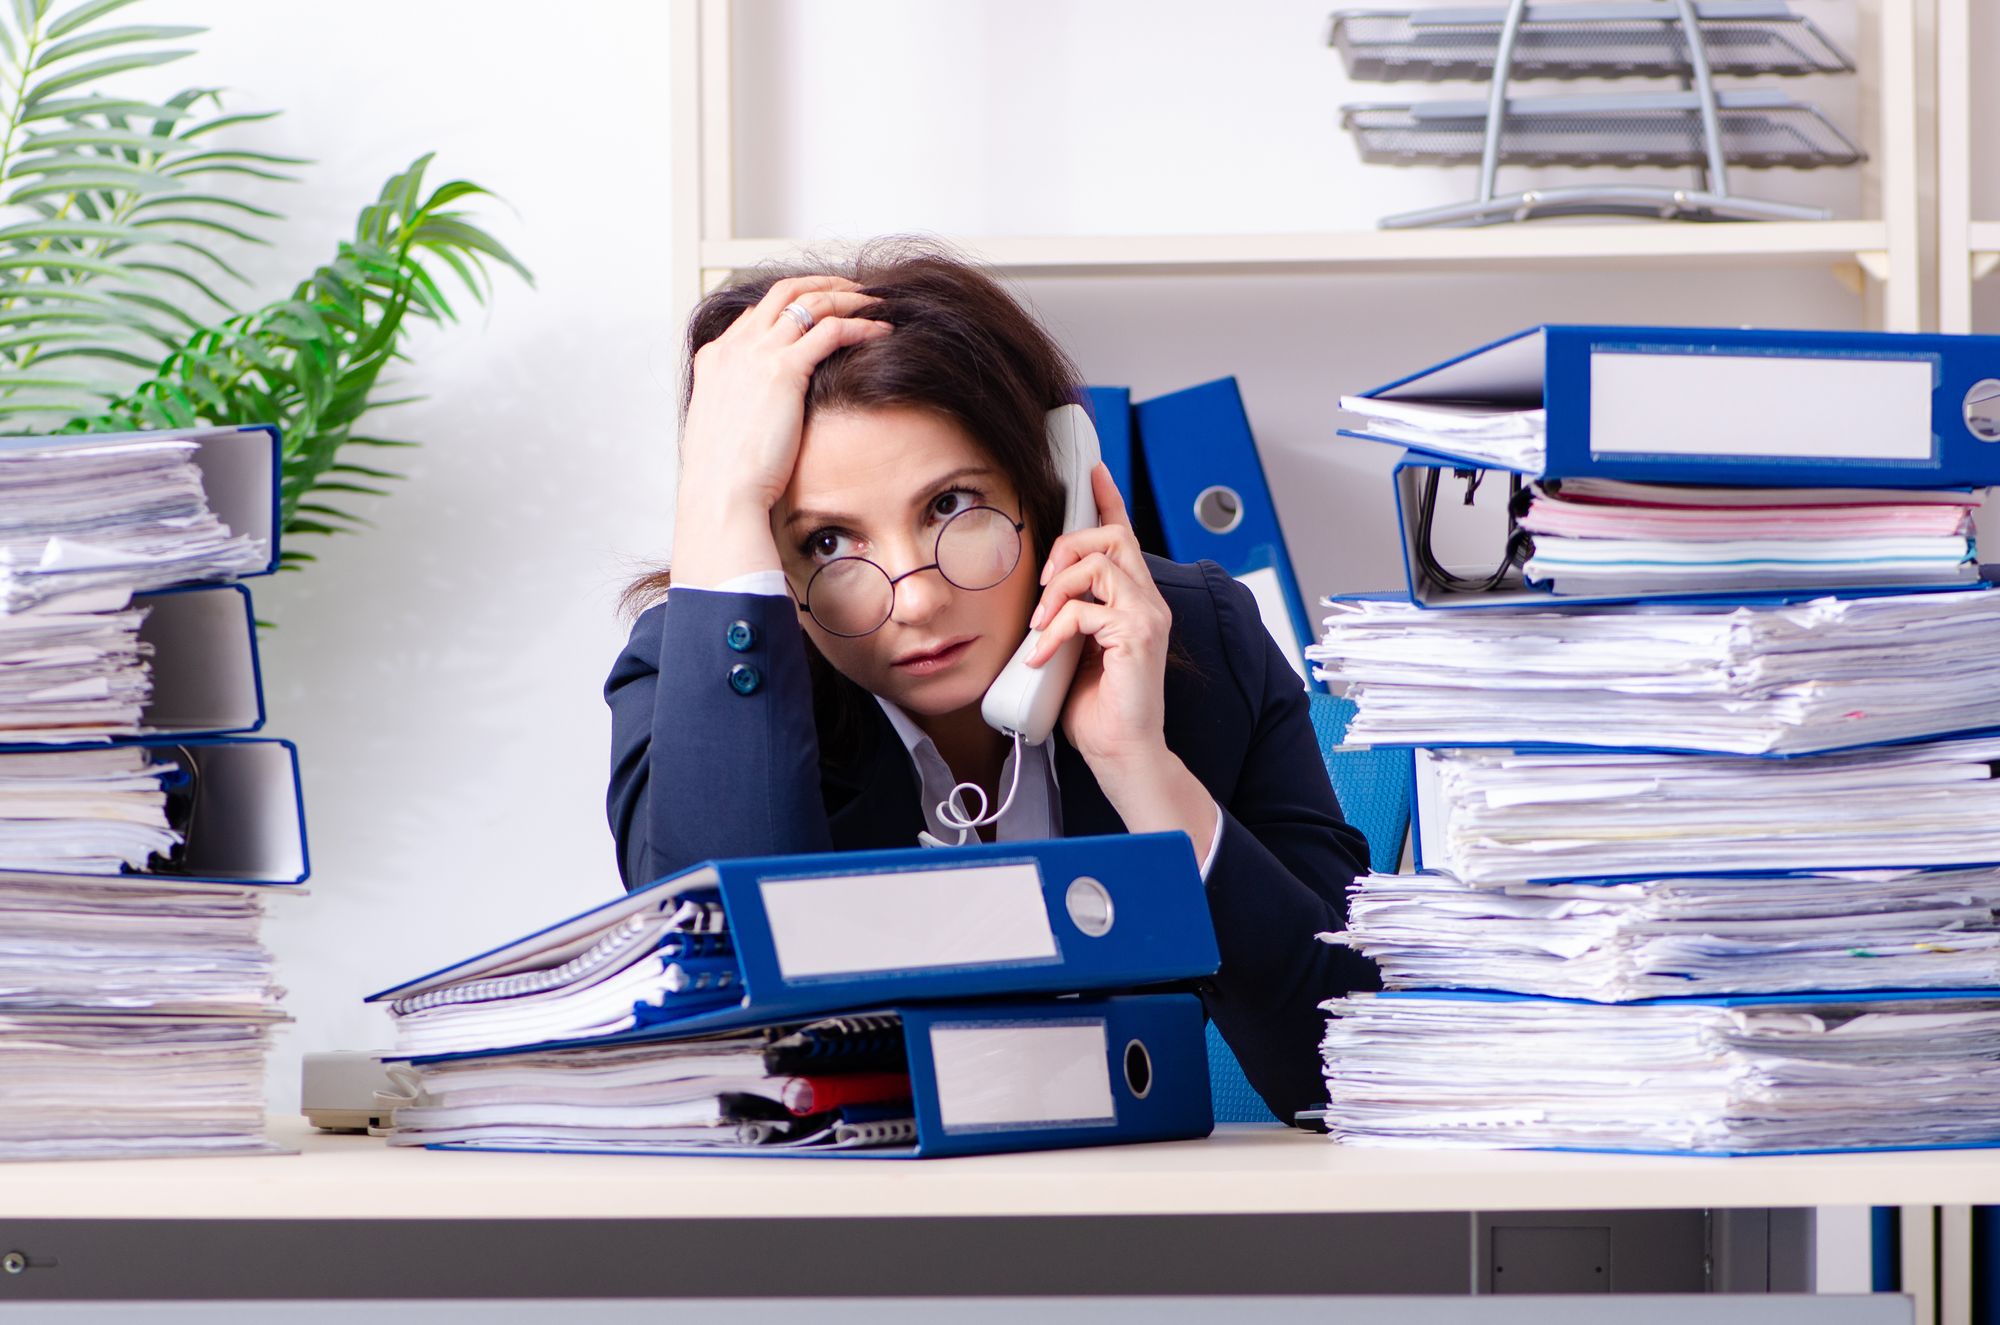 Excessive Workload can lead to Poor Employee Mental Health